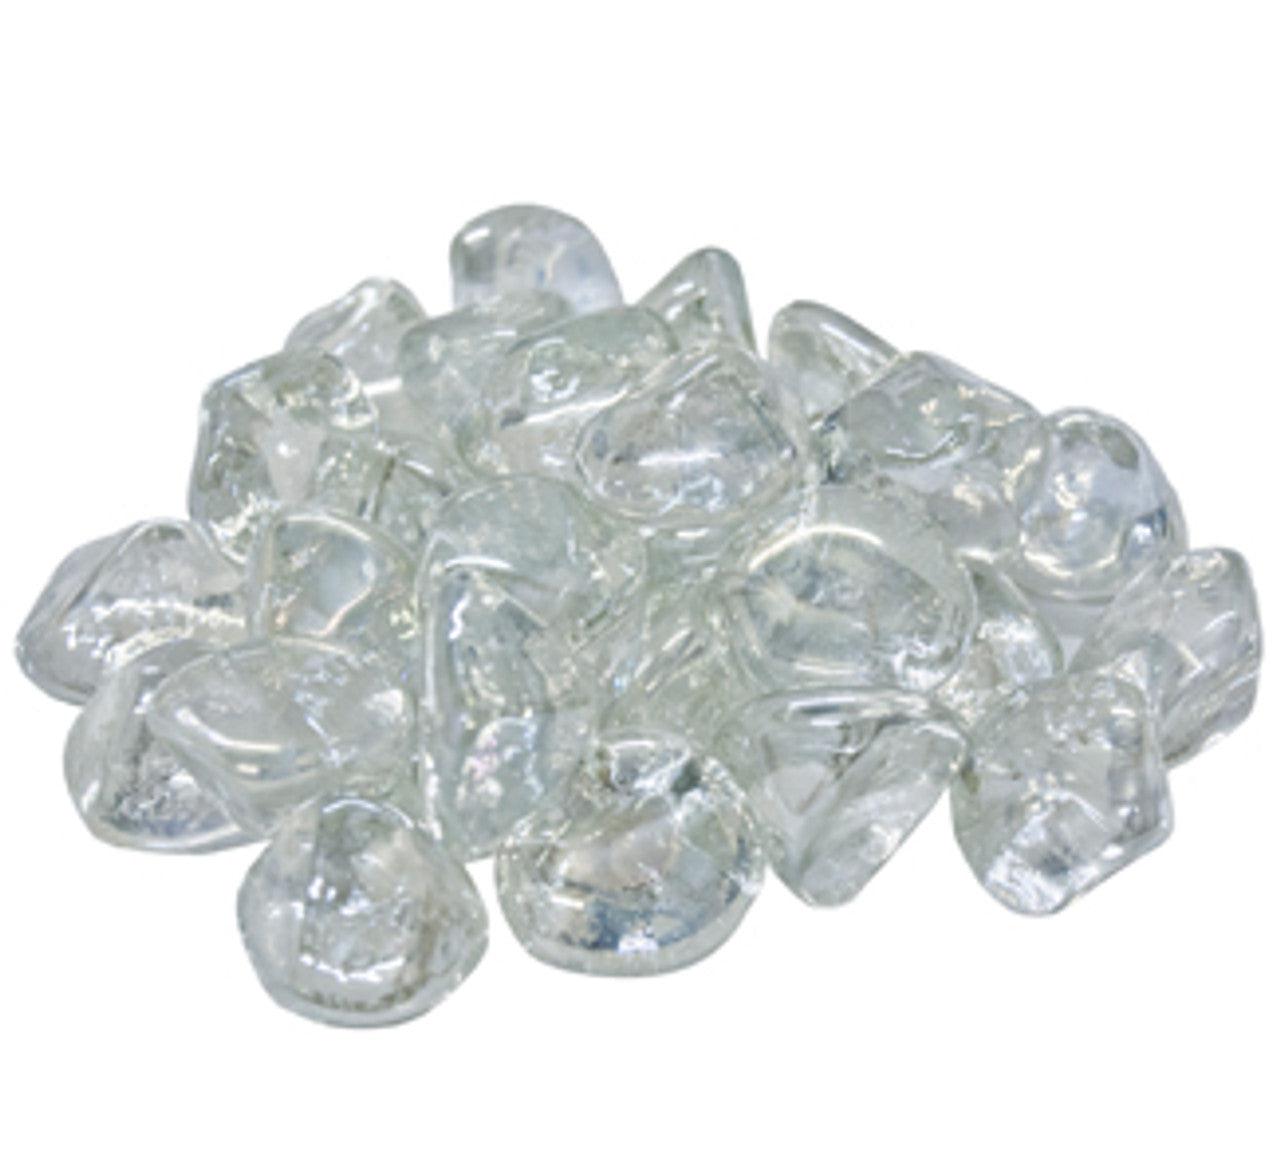 20 lb. Package of Diamond Nuggets Glass Media